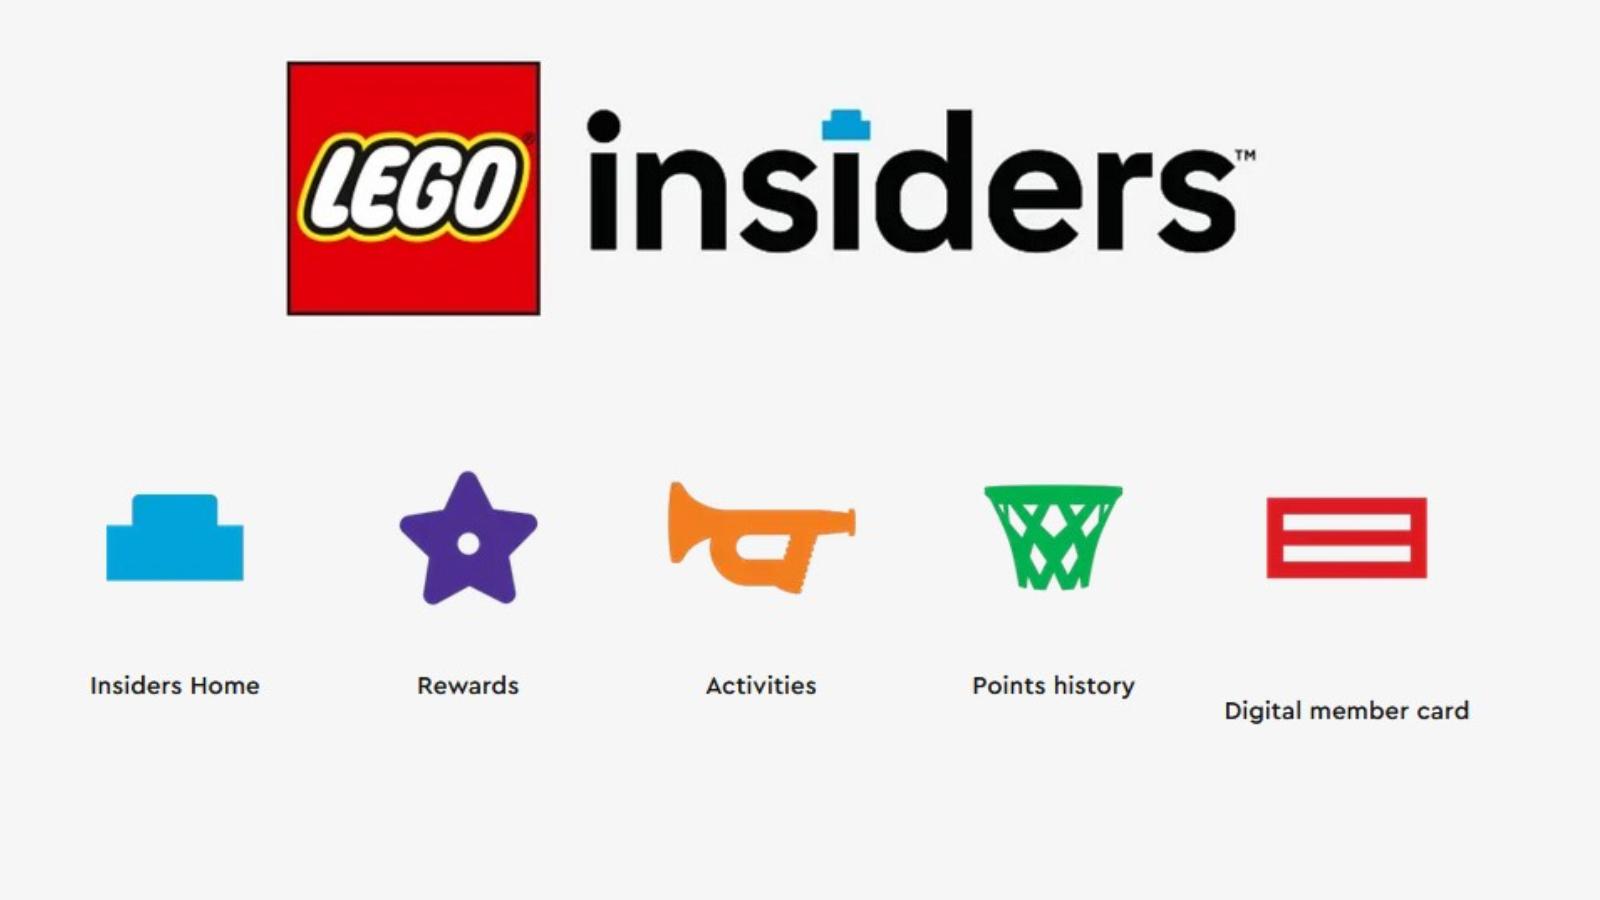 LEGO Insiders cover image